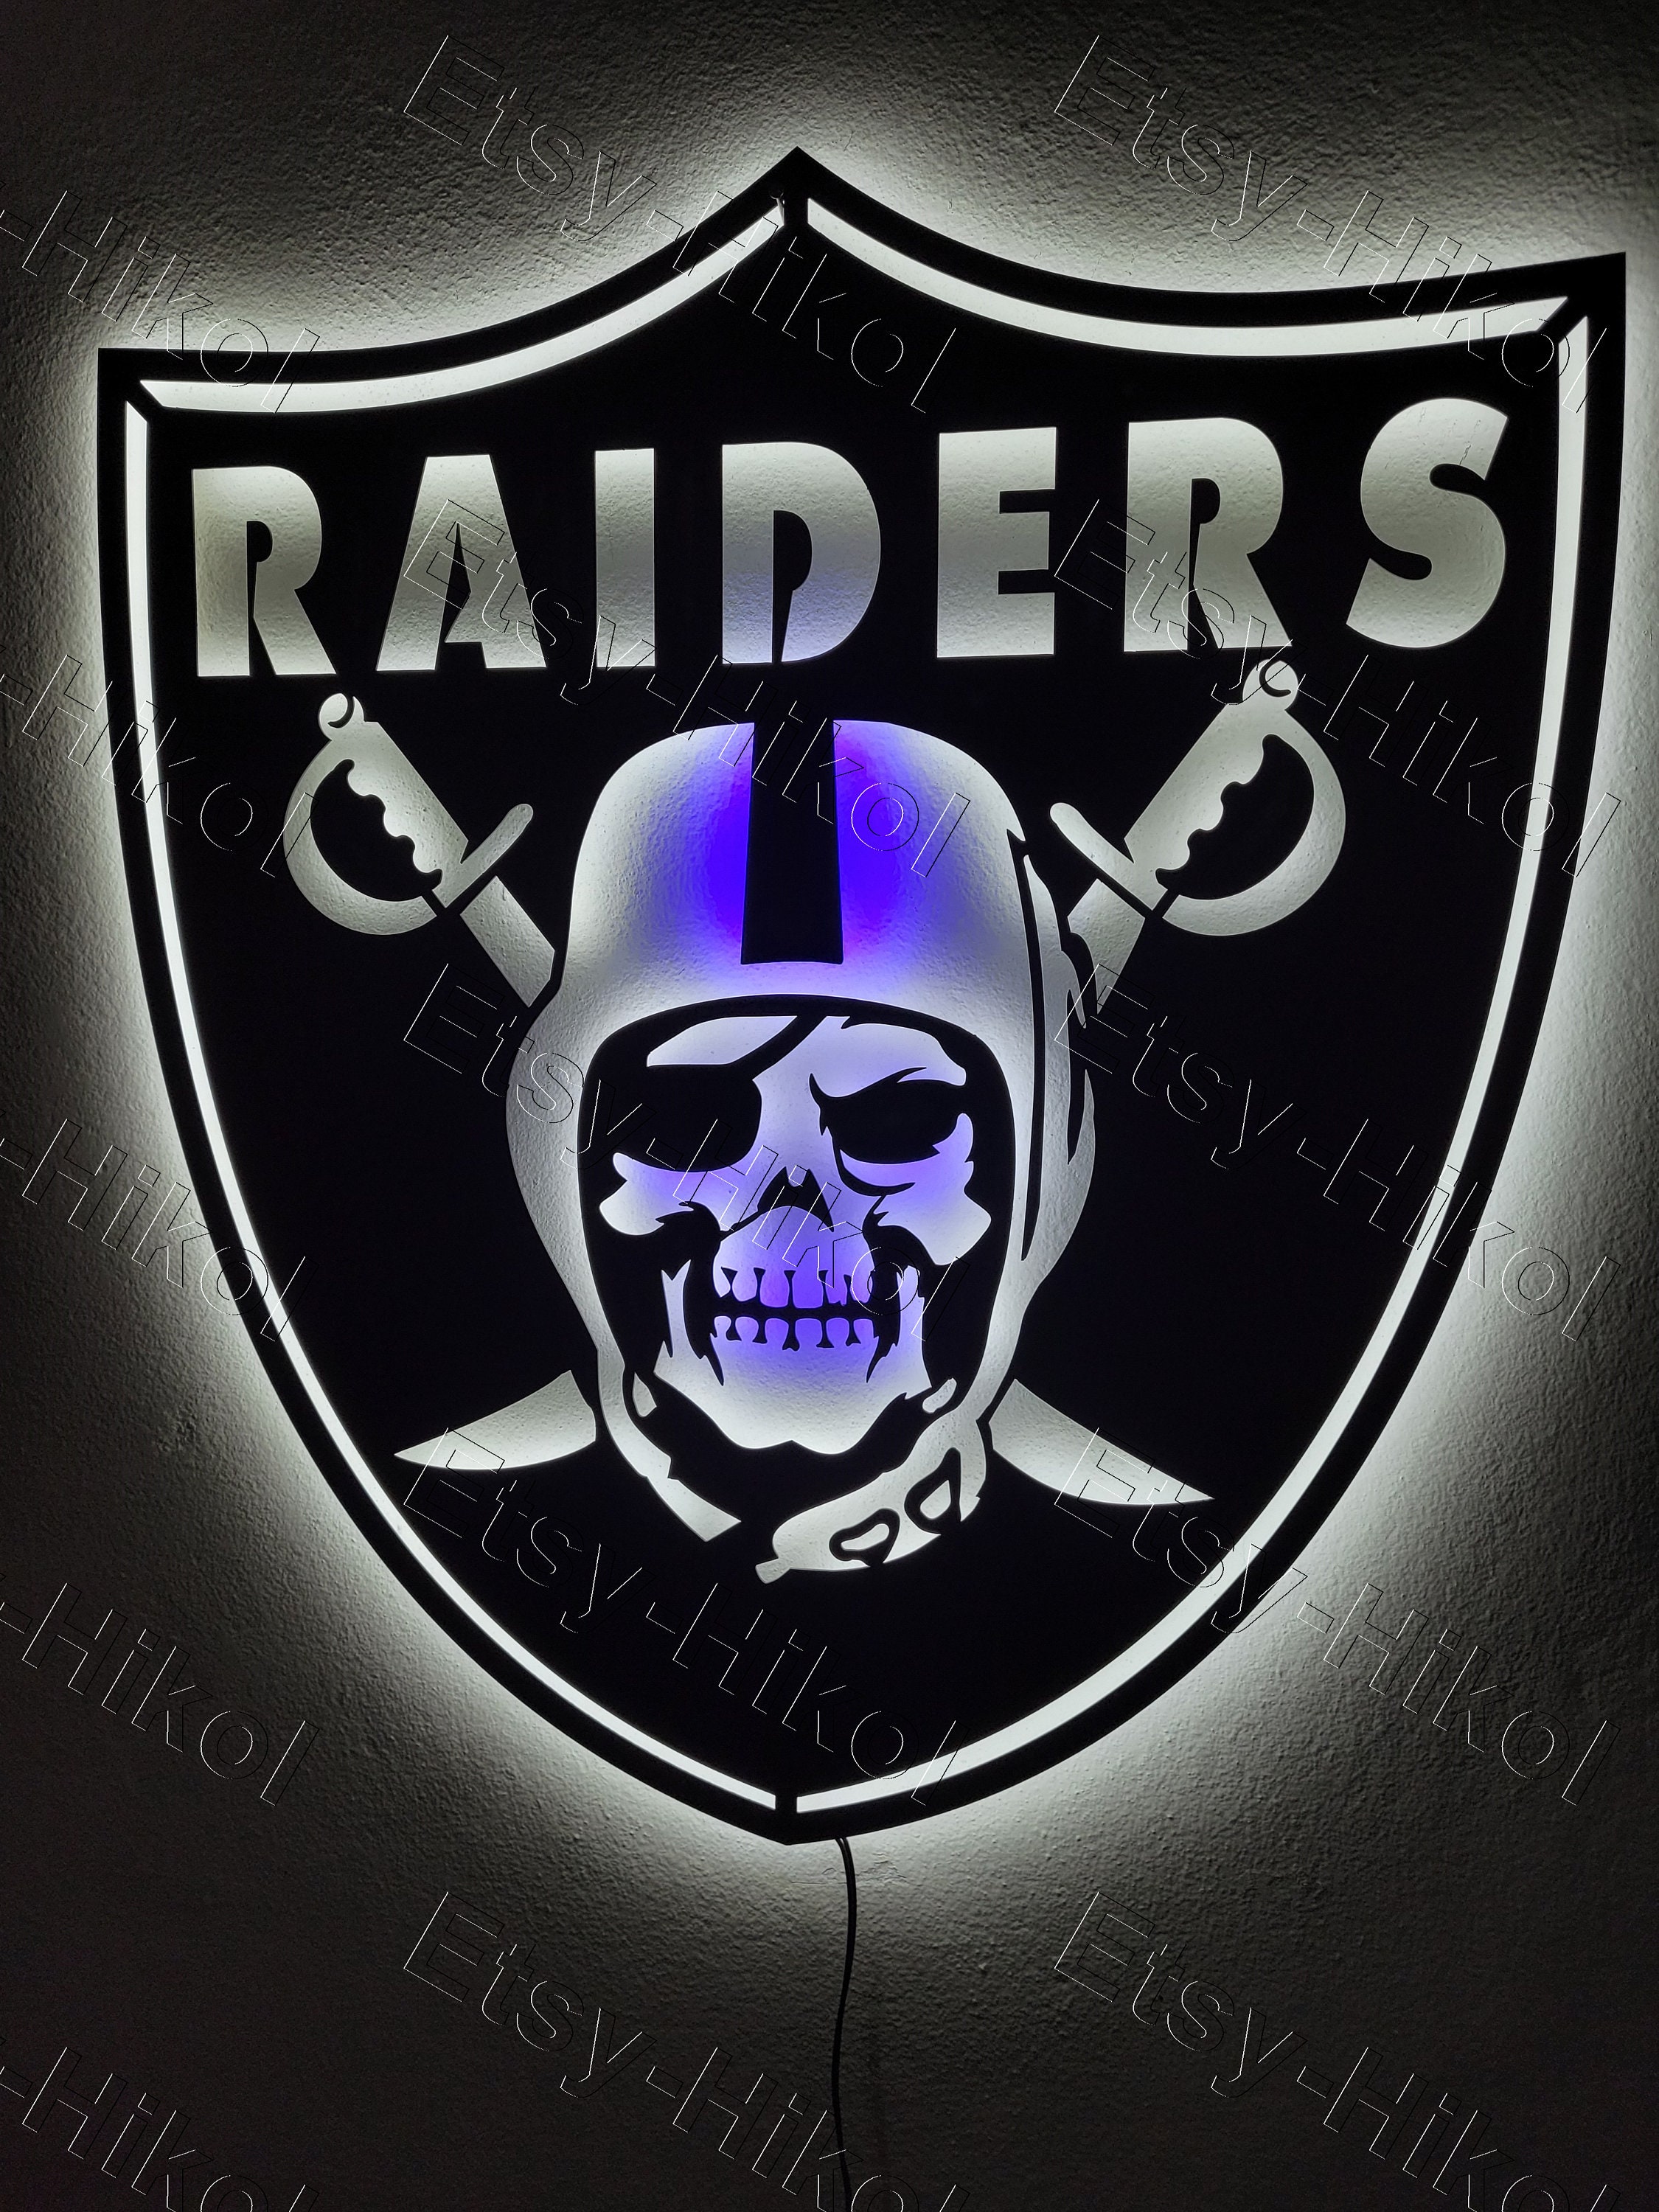 Las Vegas Raiders Wooden Football Helmet Sign by FOCO – Limited Edition NFL  Wall Art in Team Colors – Has Metal Hook for Easy Hanging - Show Your Team